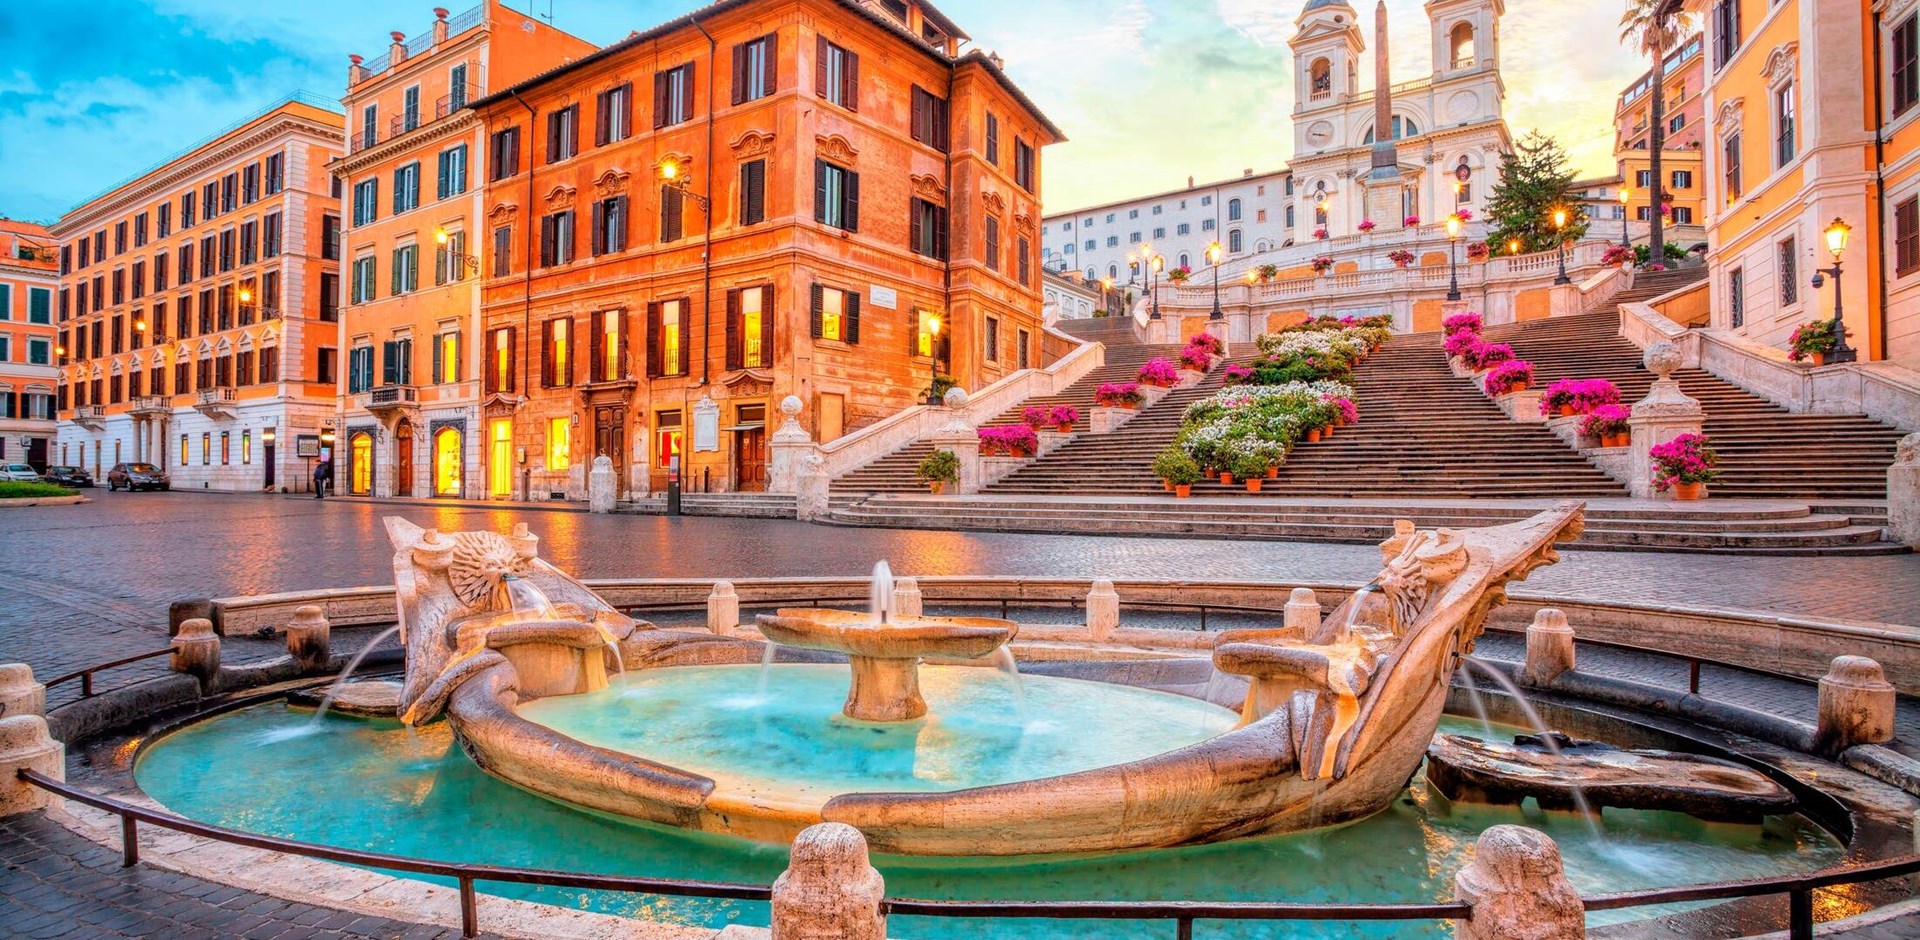 Piazza di Spagna in Rome, italy.  Spanish steps in Rome, Italy in the morning. One of the most famous squares in Rome, Italy. Rome architecture and landmark.